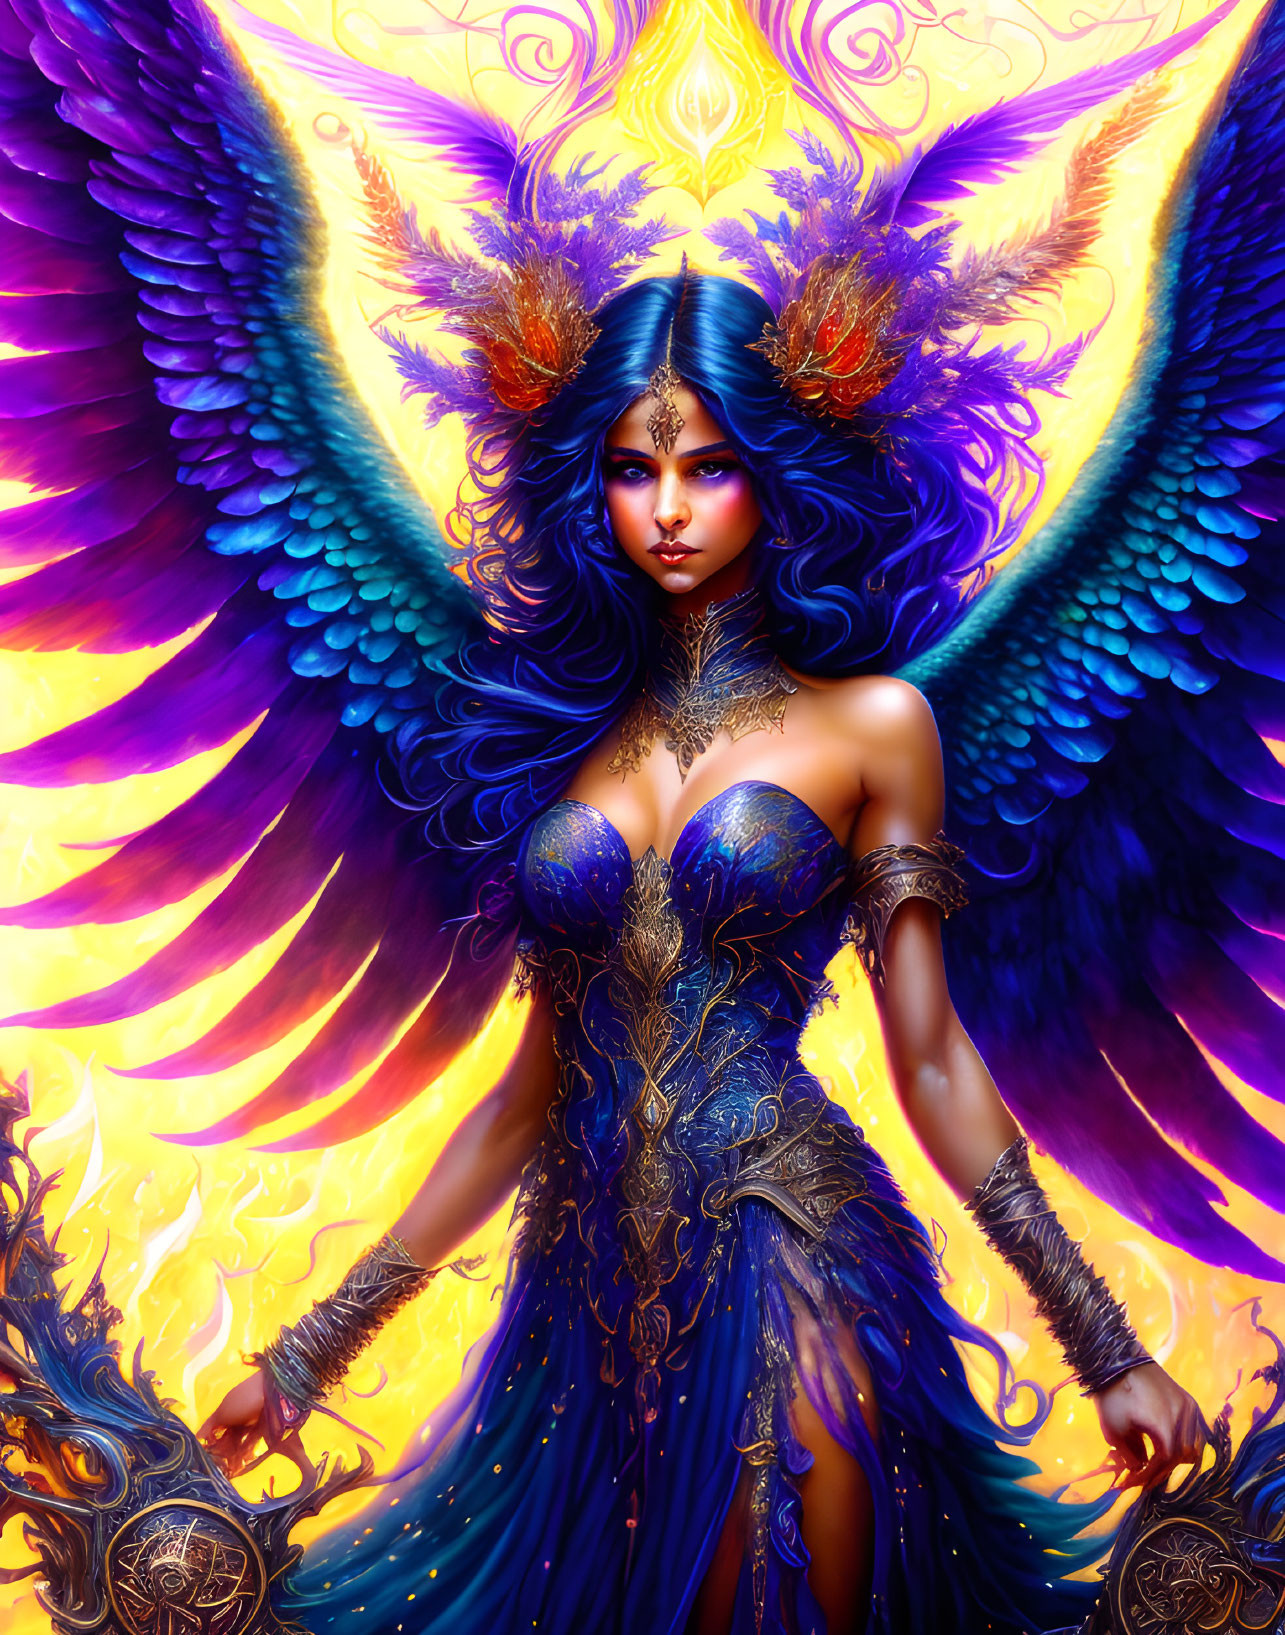 Fantastical female figure in blue and gold attire with feathered wings and mystical headdress against fiery